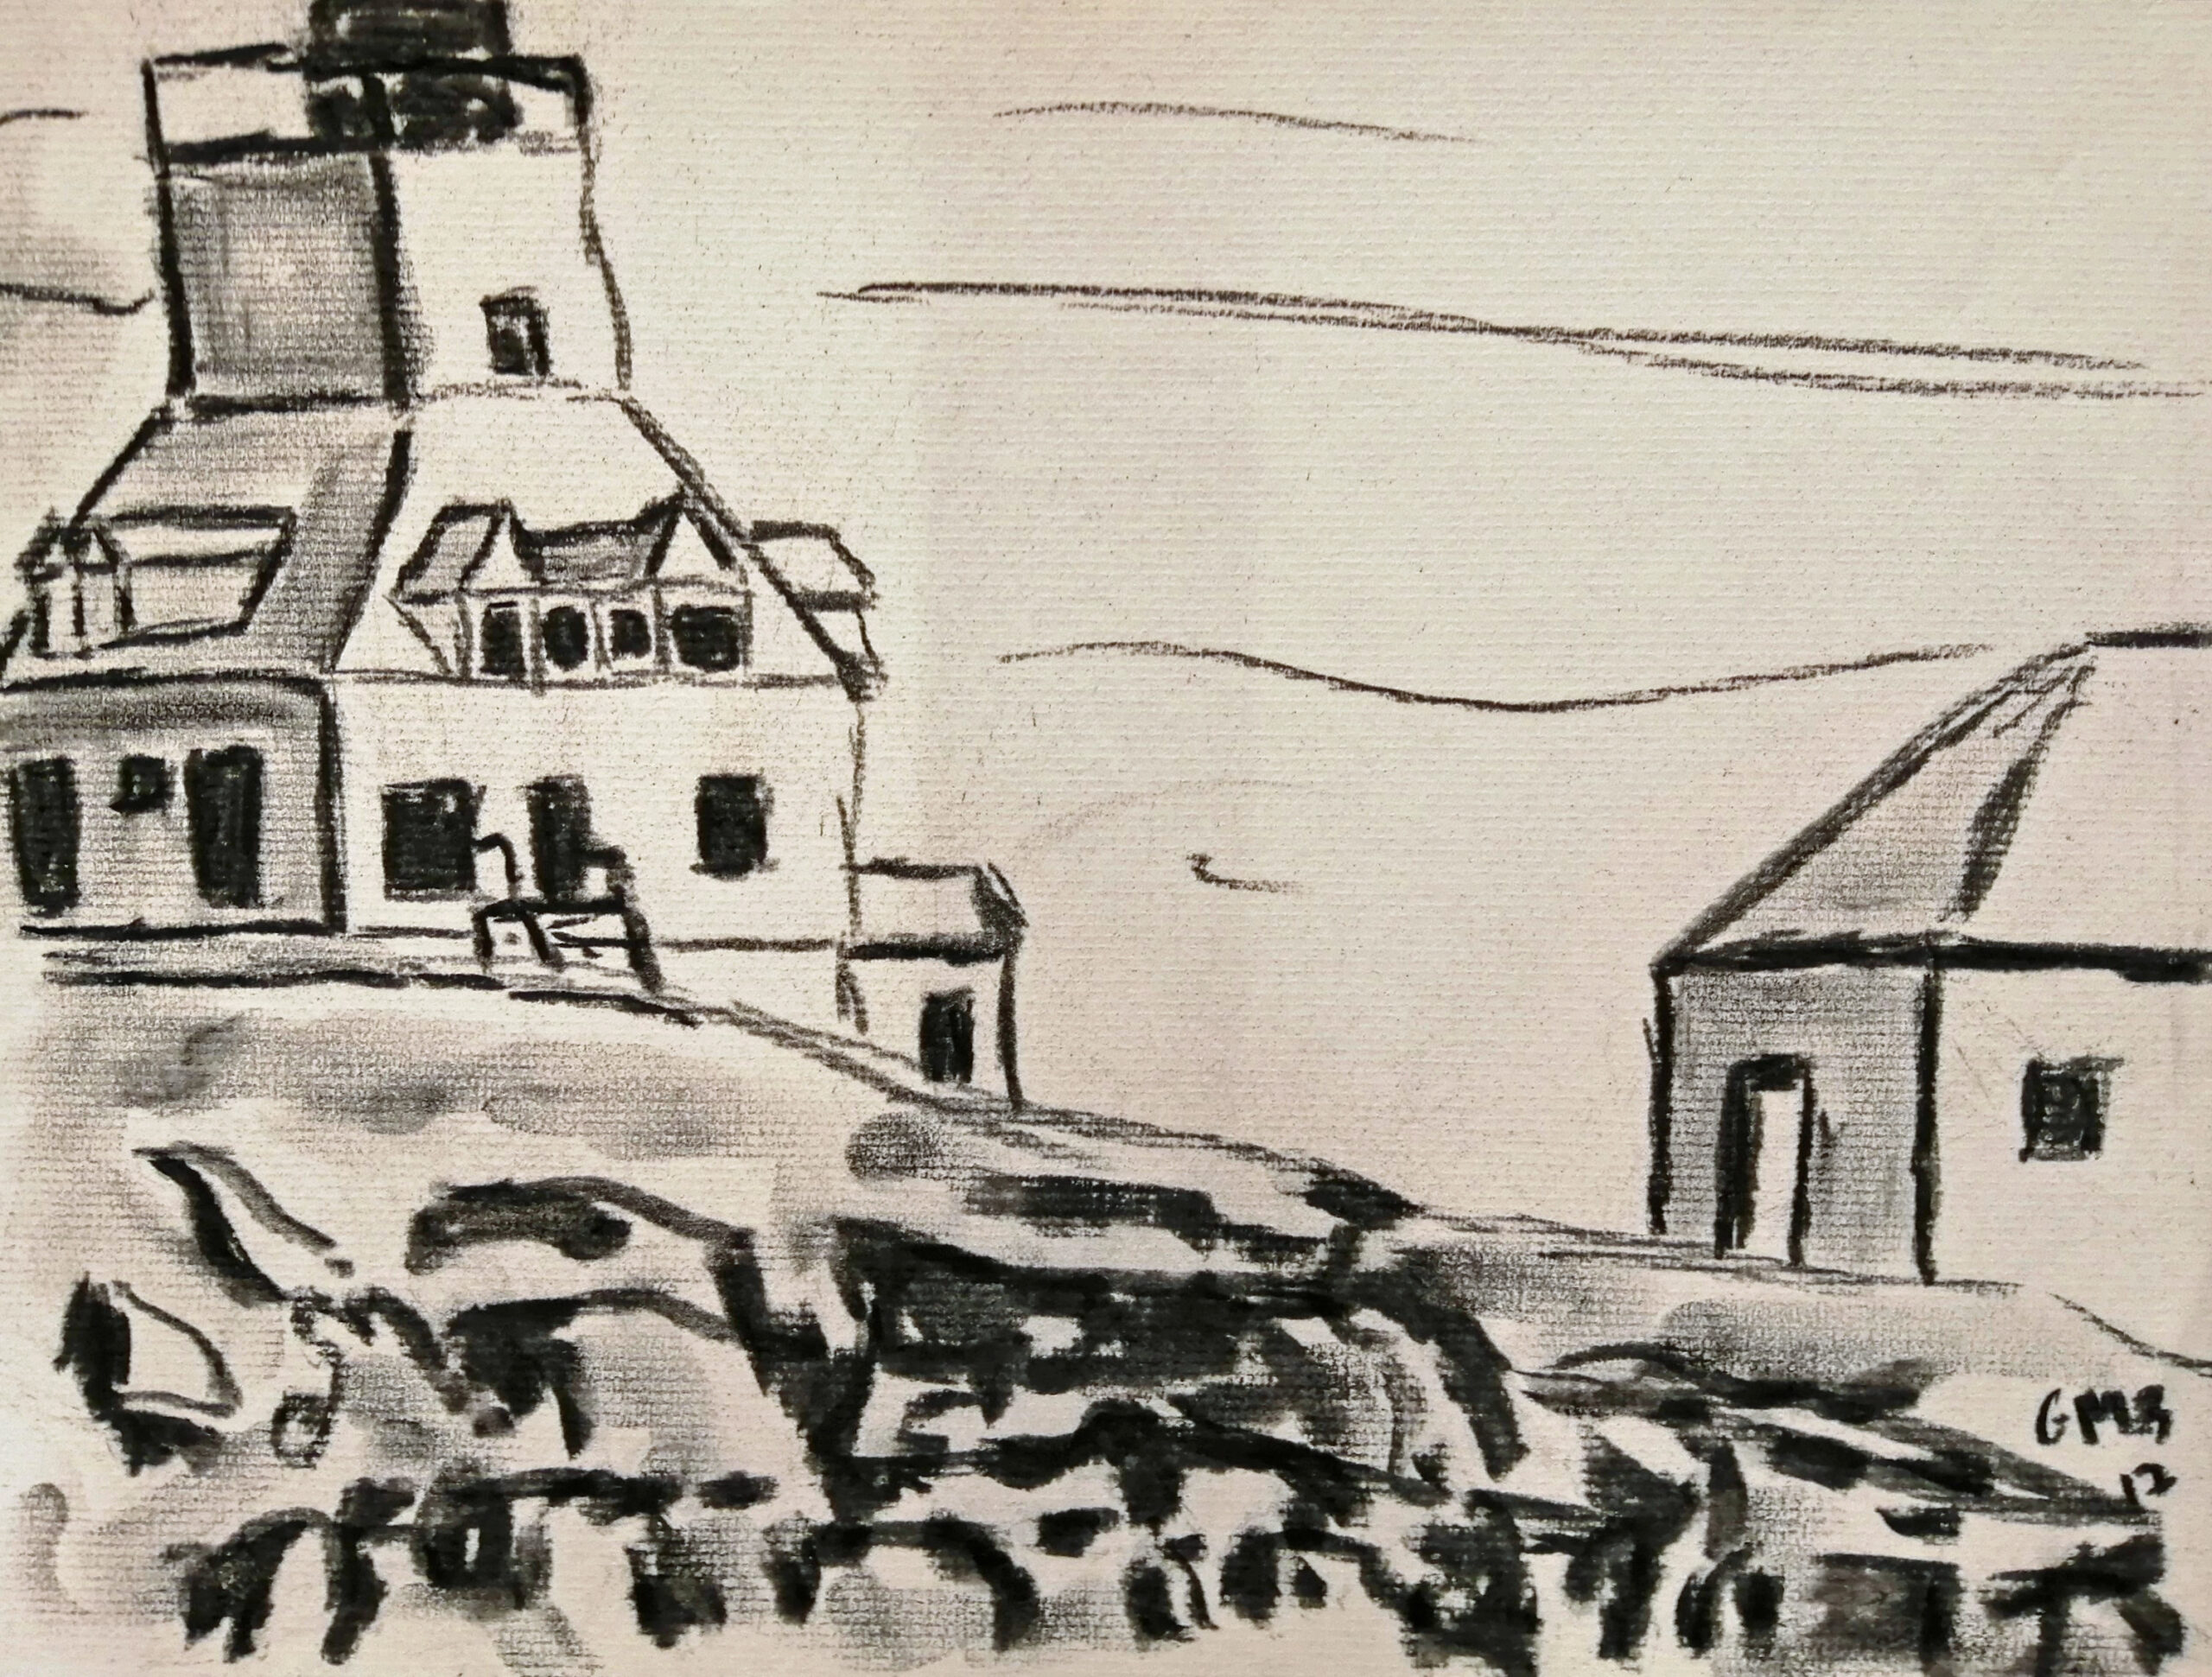 Study of Egg Rock Lighthouse is a charcoal study of the lighthouse in Frenchman's Bay, Maine, near Bar Harbor.